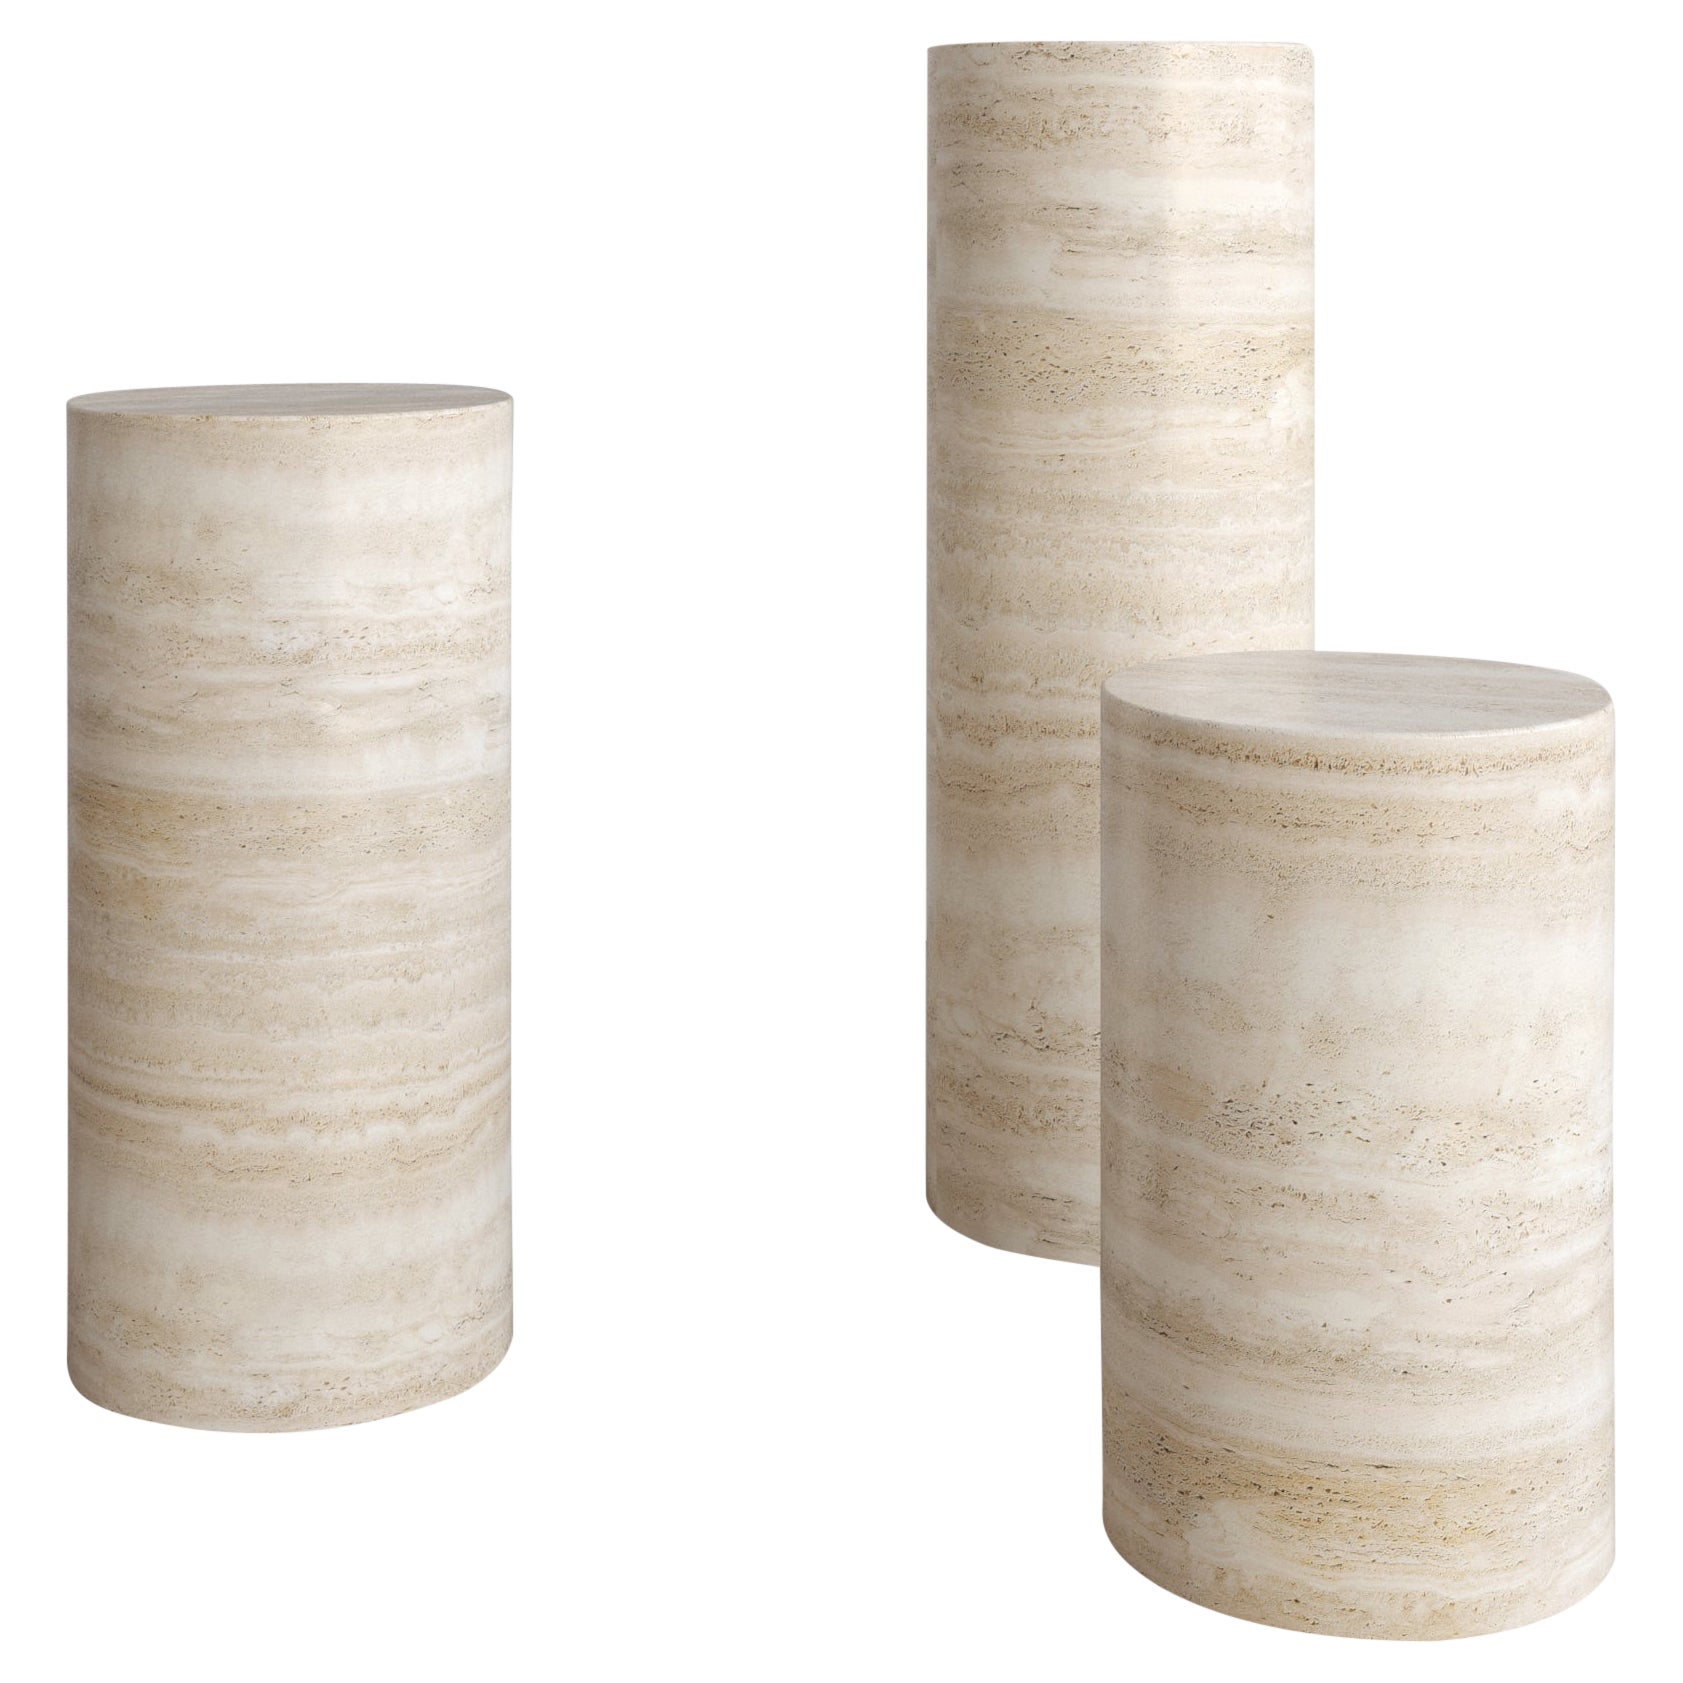 500mm Nude Travertine Voyage Pedestal by the Essentialist For Sale